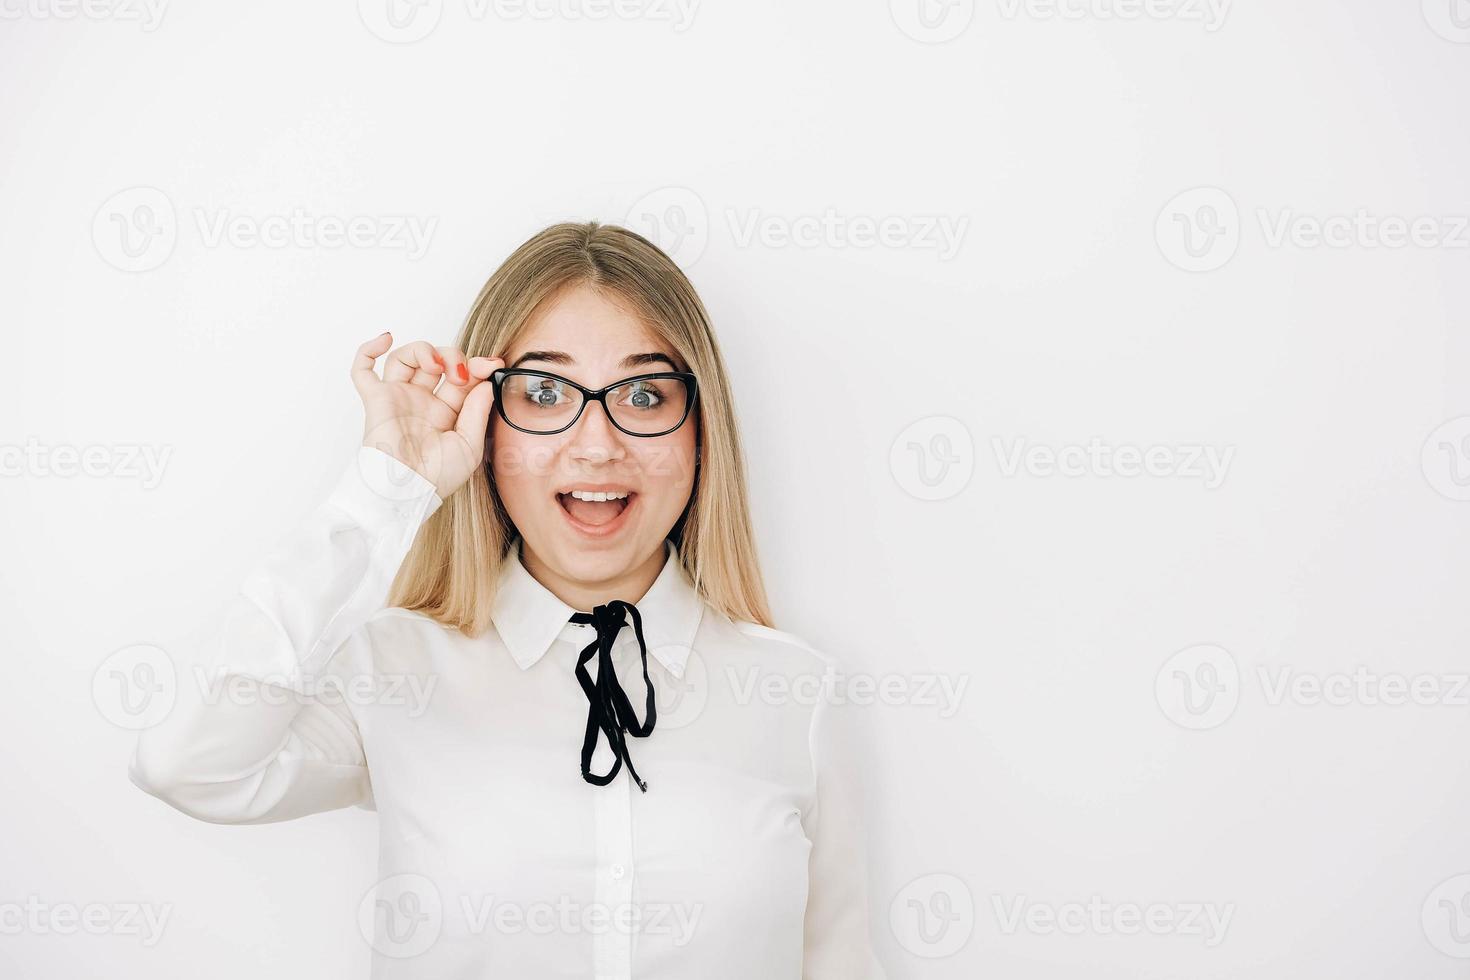 Portrait of a positive beautiful blonde woman wearing stylish white shirt holding her glasses on a white background. Copy, empty space for text photo